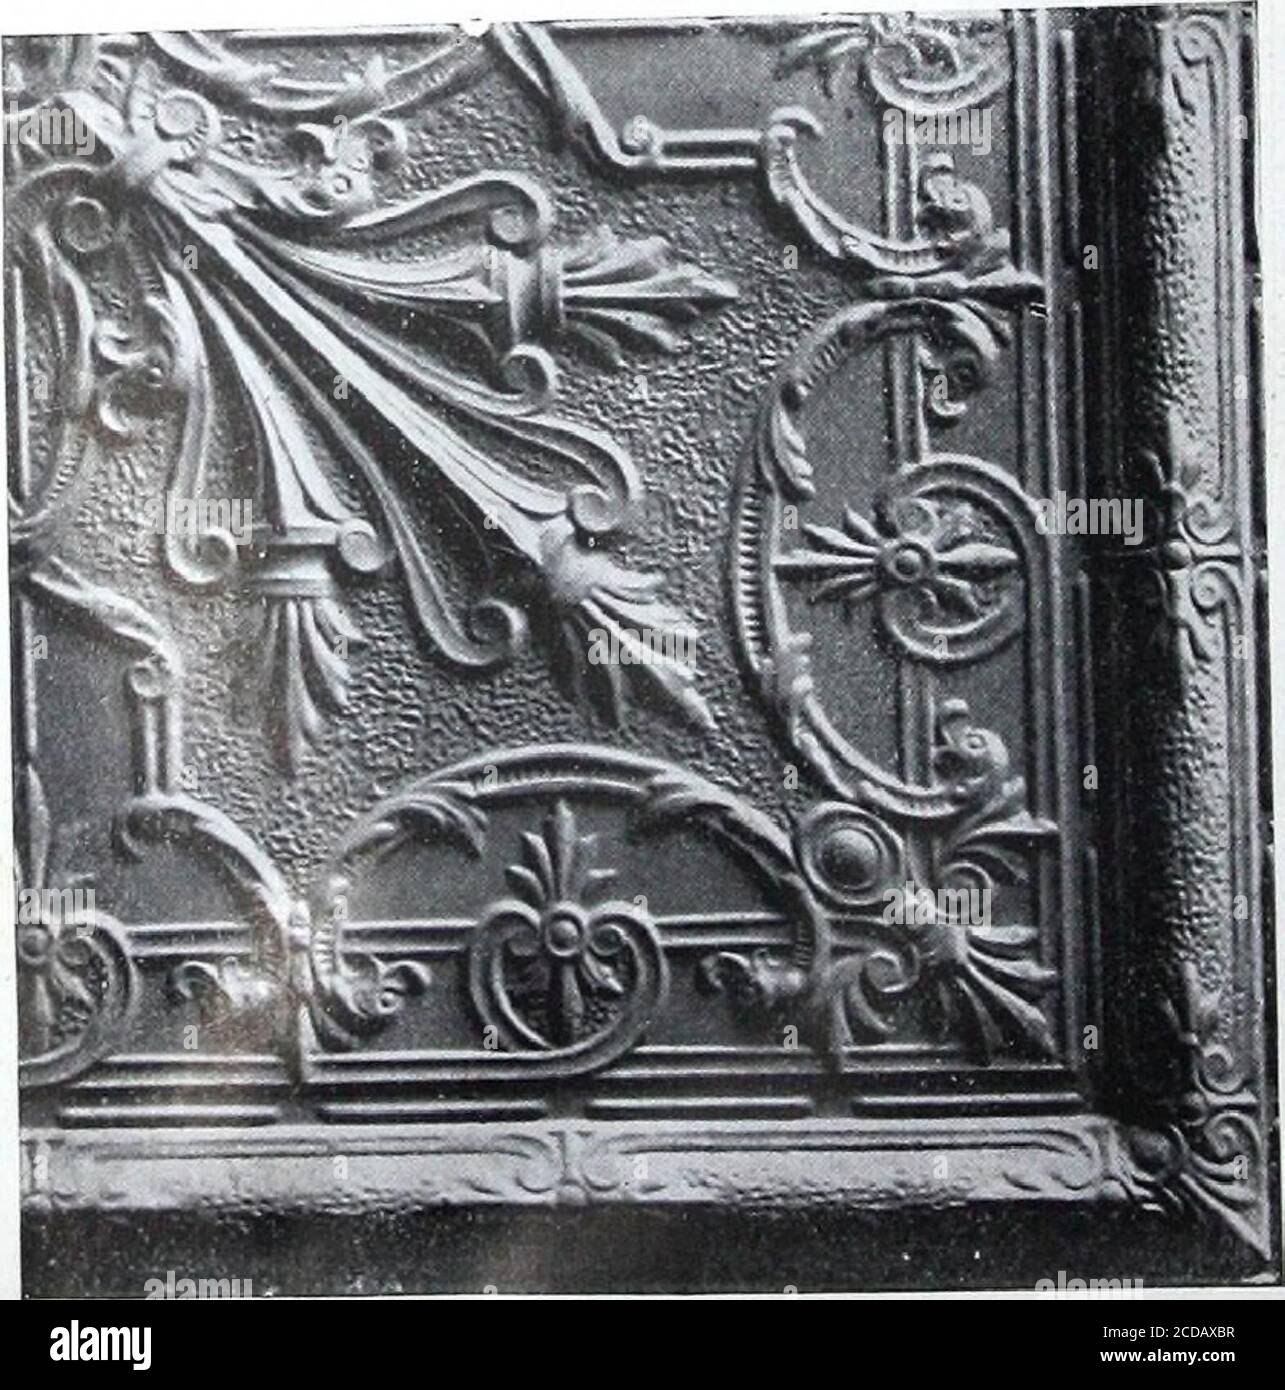 . Ceilings & Side Walls : Catalogue no 60 . Moulded Border Plate No. 4104 Si/.o, ^8 X 48 inches. Composed of Border Plate No. 4101 and Moulding No. 4201. Code Vsord—Xegro.. i Inside Corner Plate No. 4105 Size, 28 X 28 inches. Used with Moulded Border No. 4104.Composed of Inside Corner Plate No. 4102 and Moulding No. 4201. Code Word Page Ninety-Eight Neighbor * I ? Louis XIV Mouldings Stock Photo